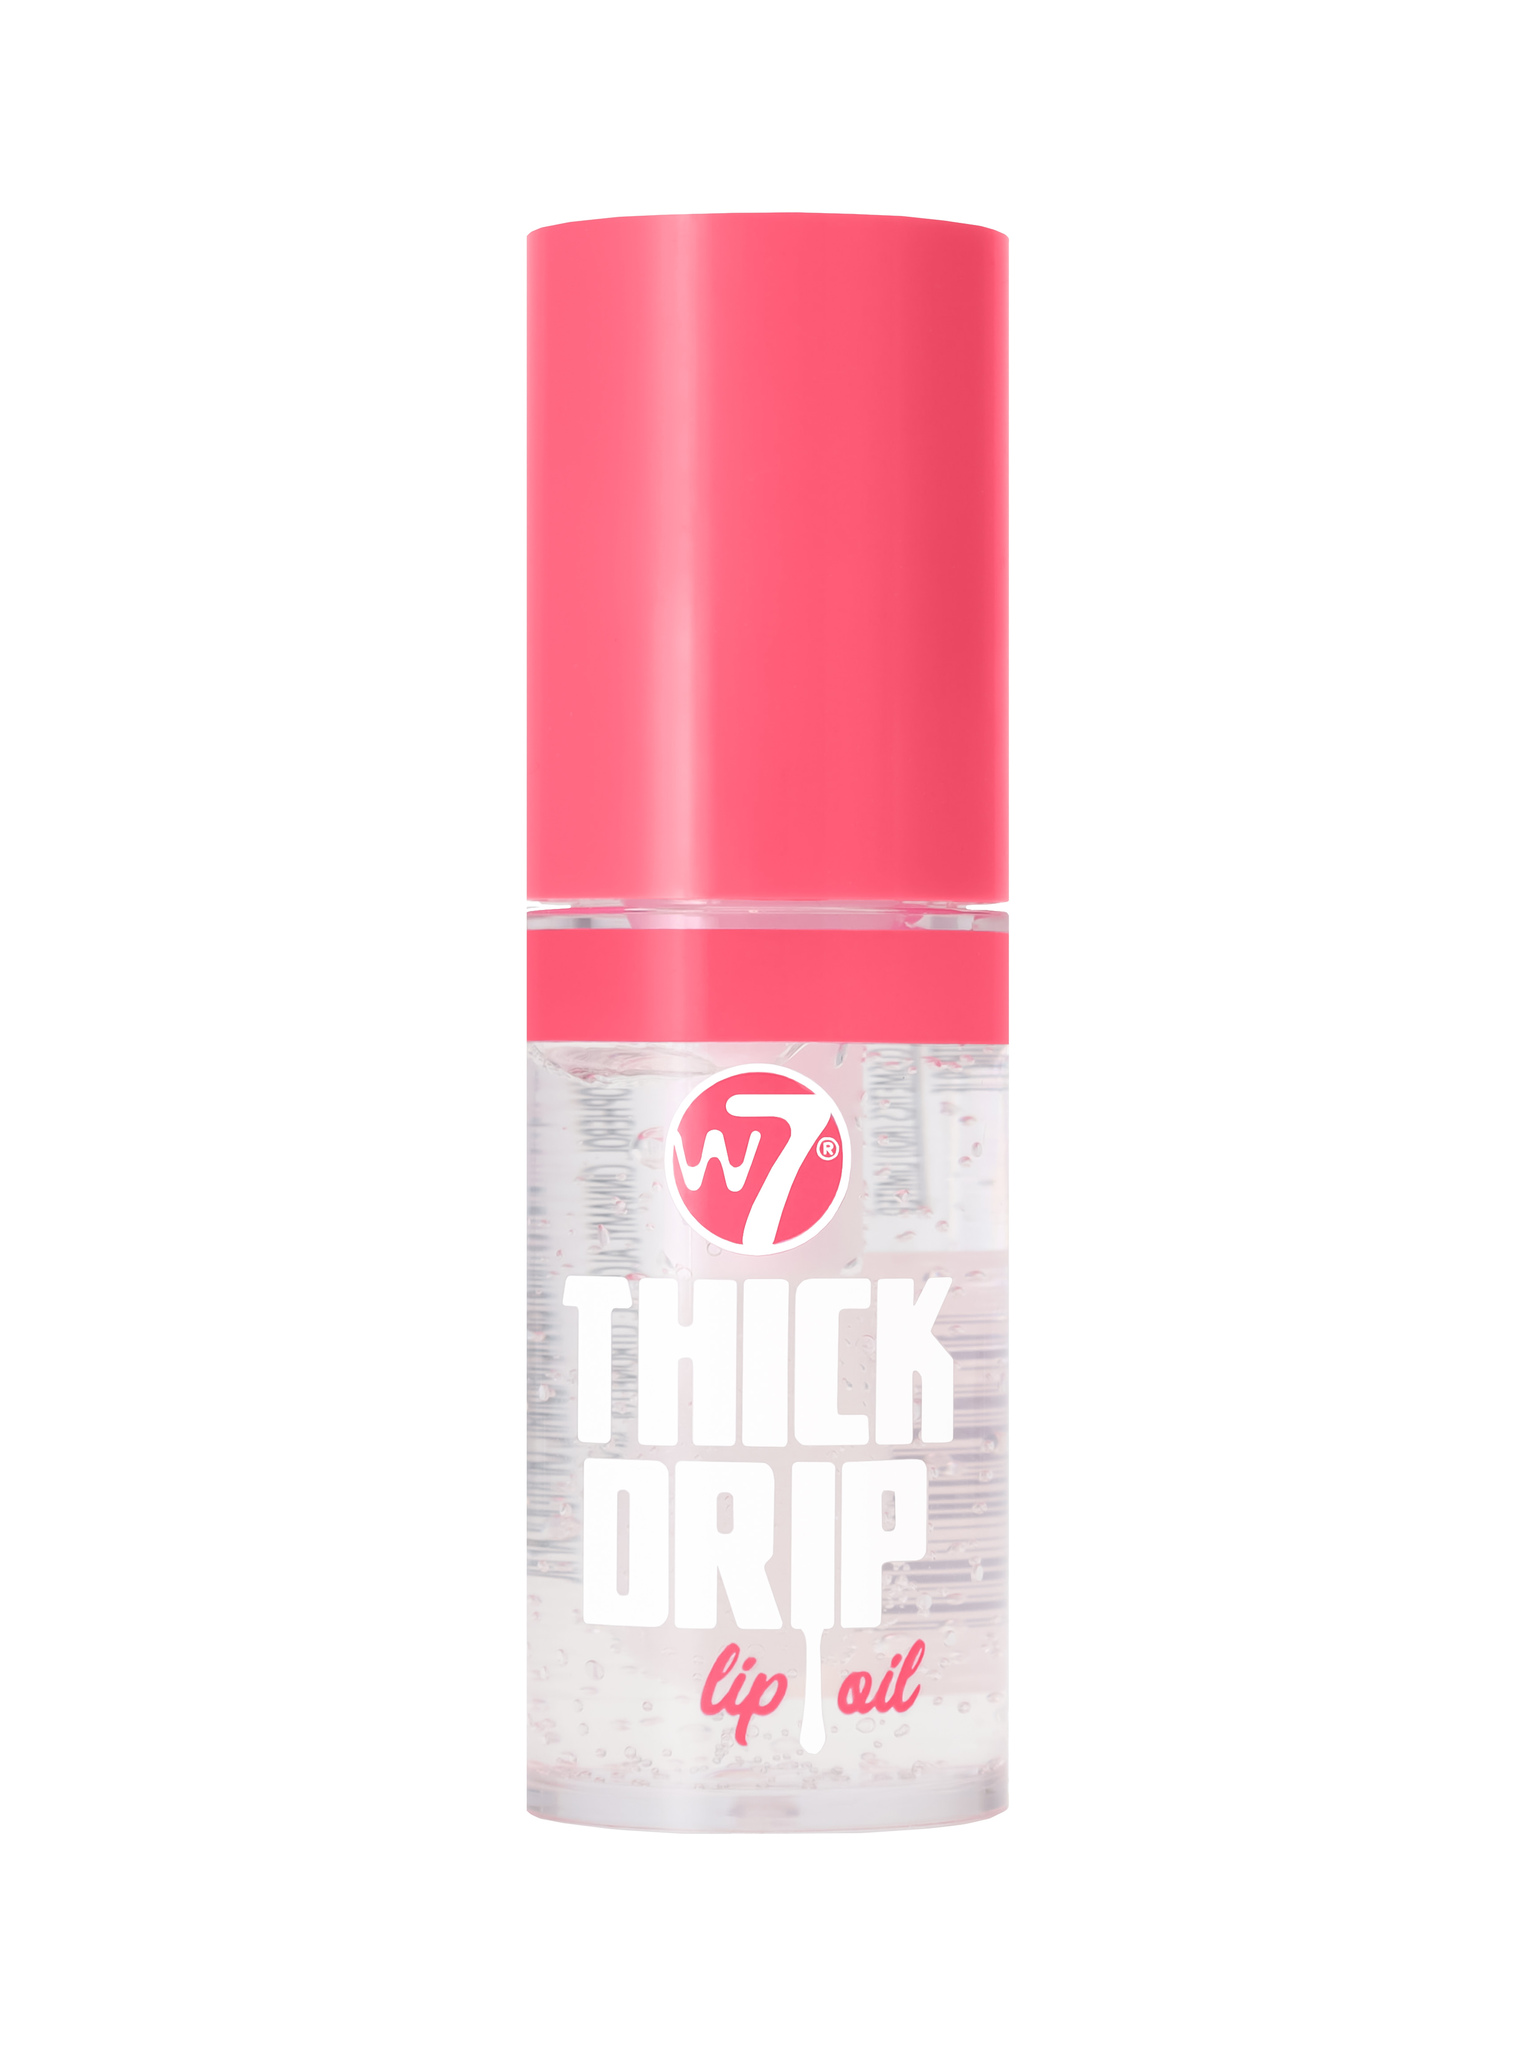 W7 THICK DRIP Lip Oil - In The Clear